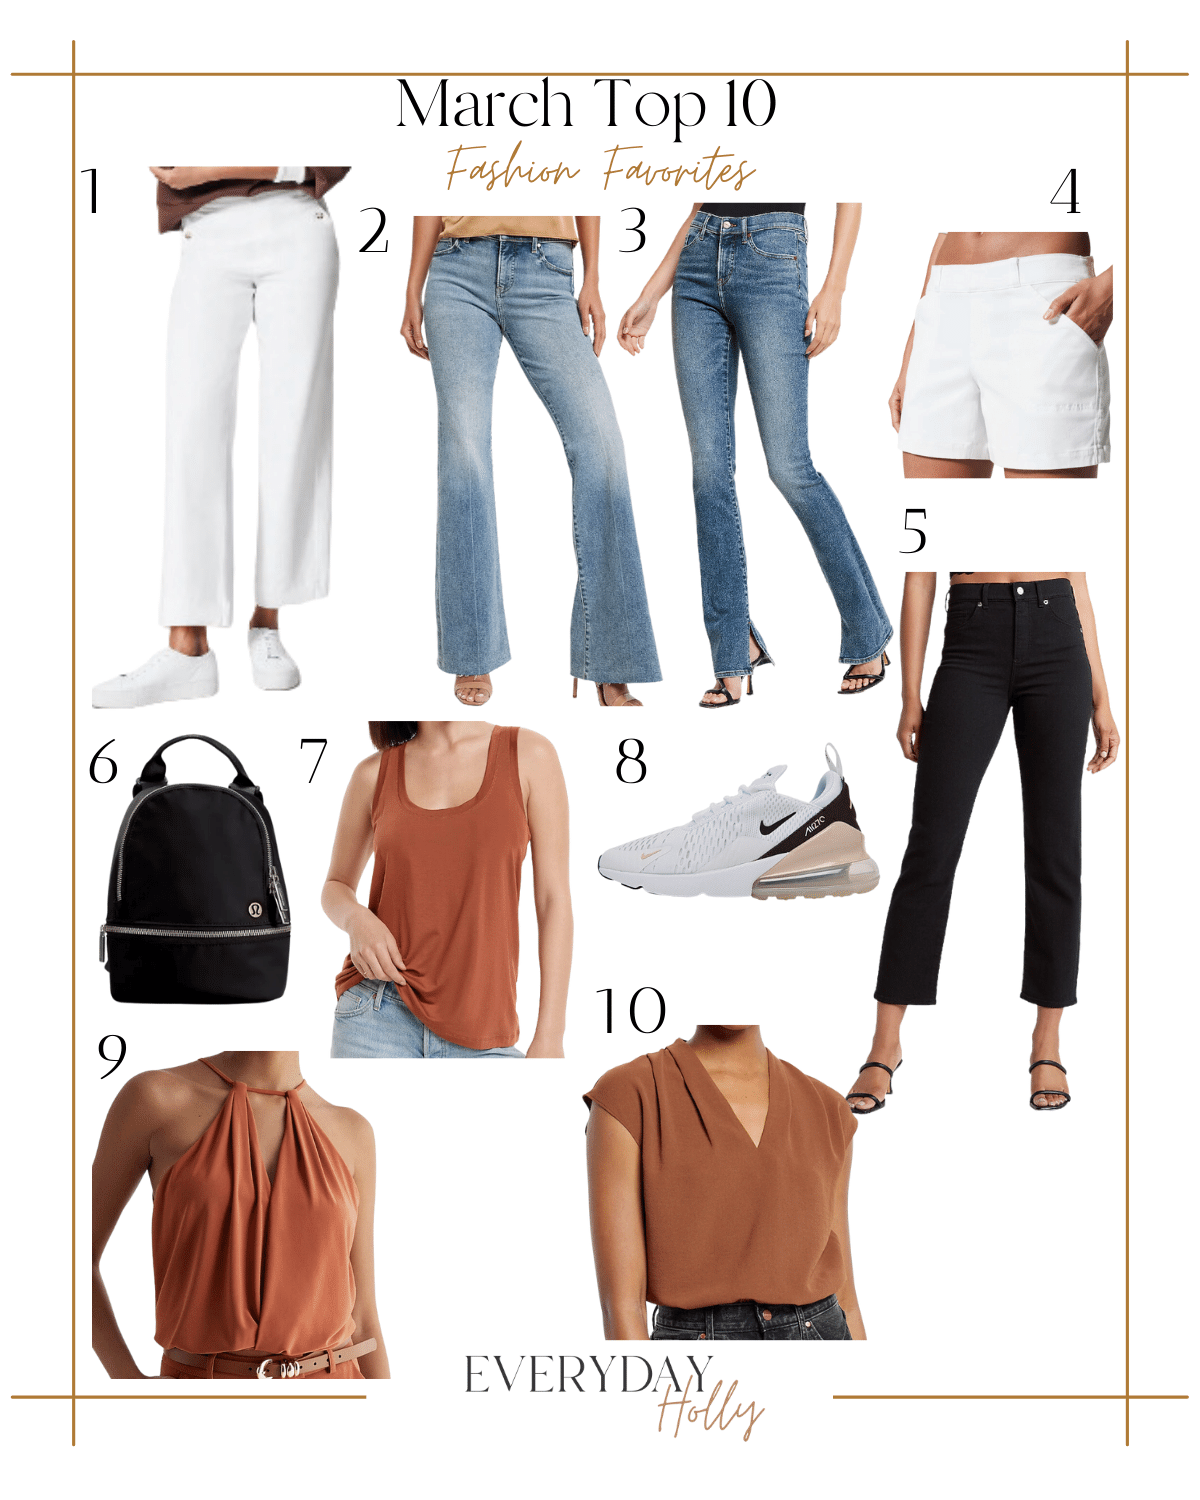 march top 10, fashion favorites, express jeans, spanx, march top sellers, shorts, nike sneakers, express blouses, orange tops, spring style, womens spring fashion